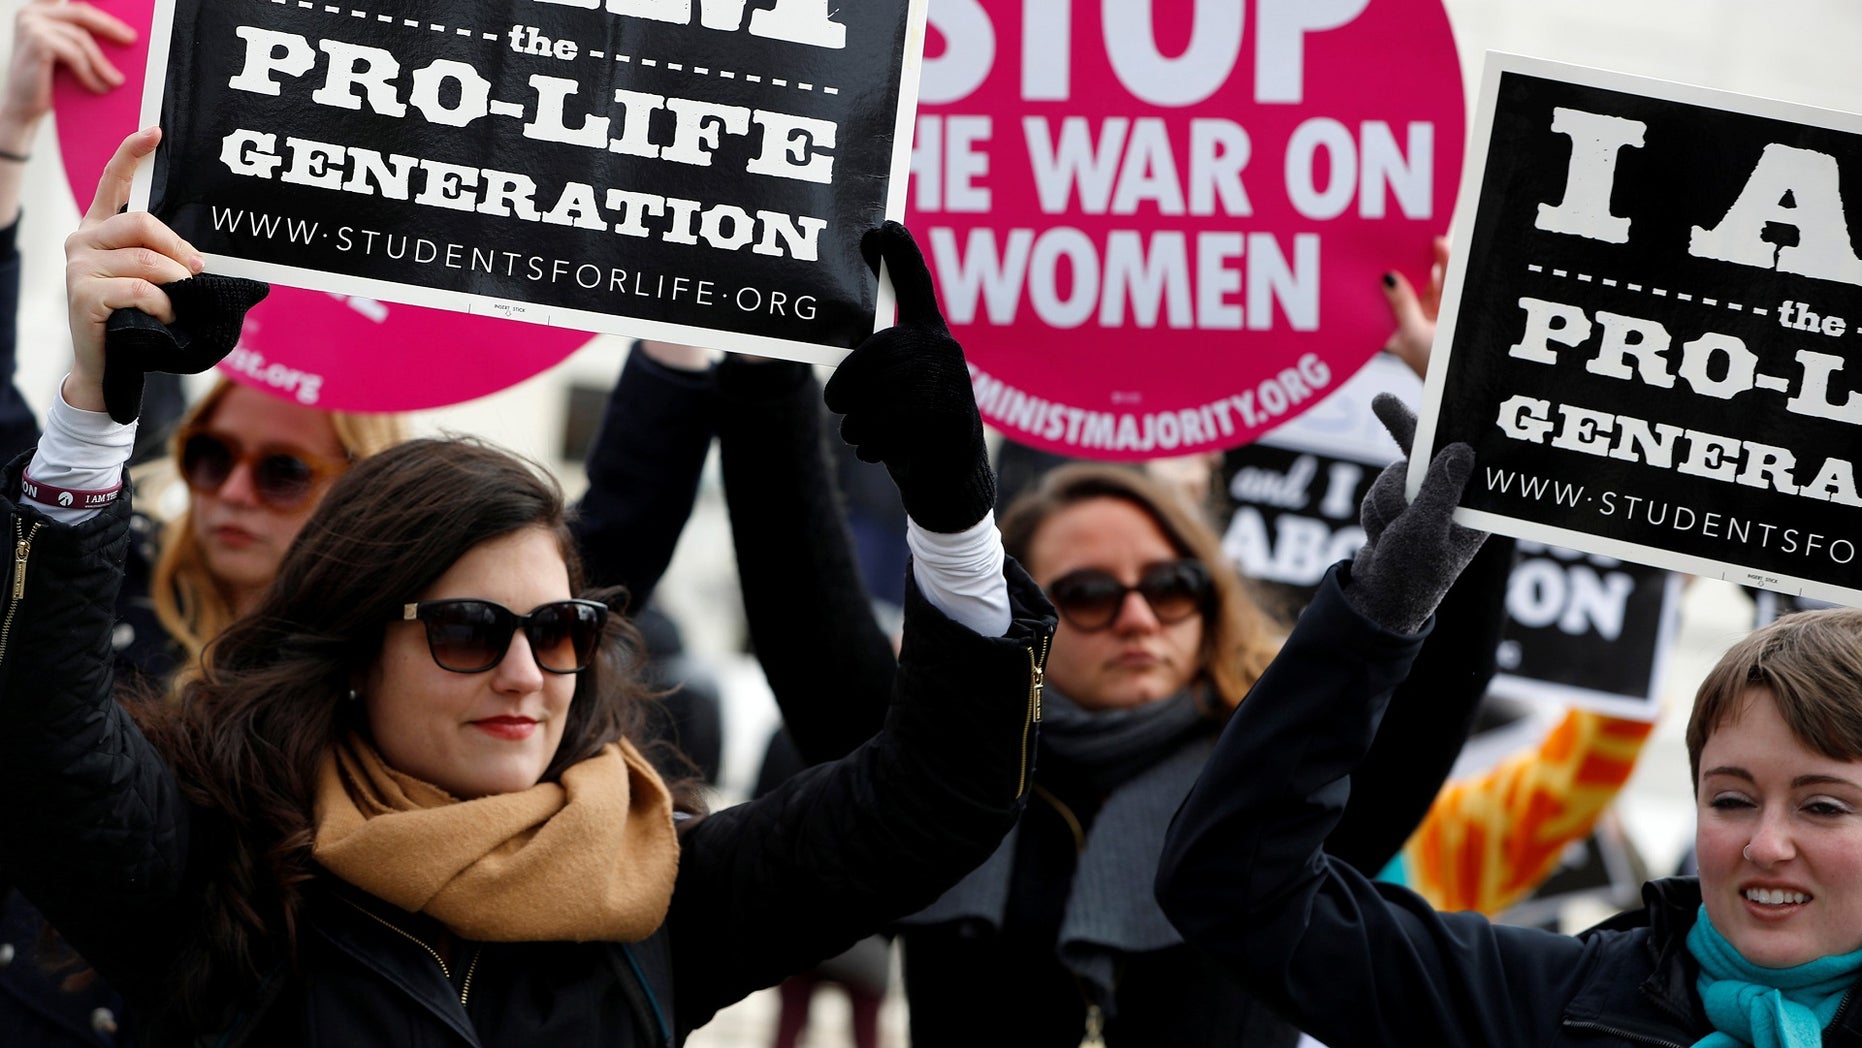 March for Life: A look at the largest pro-life rally in the US